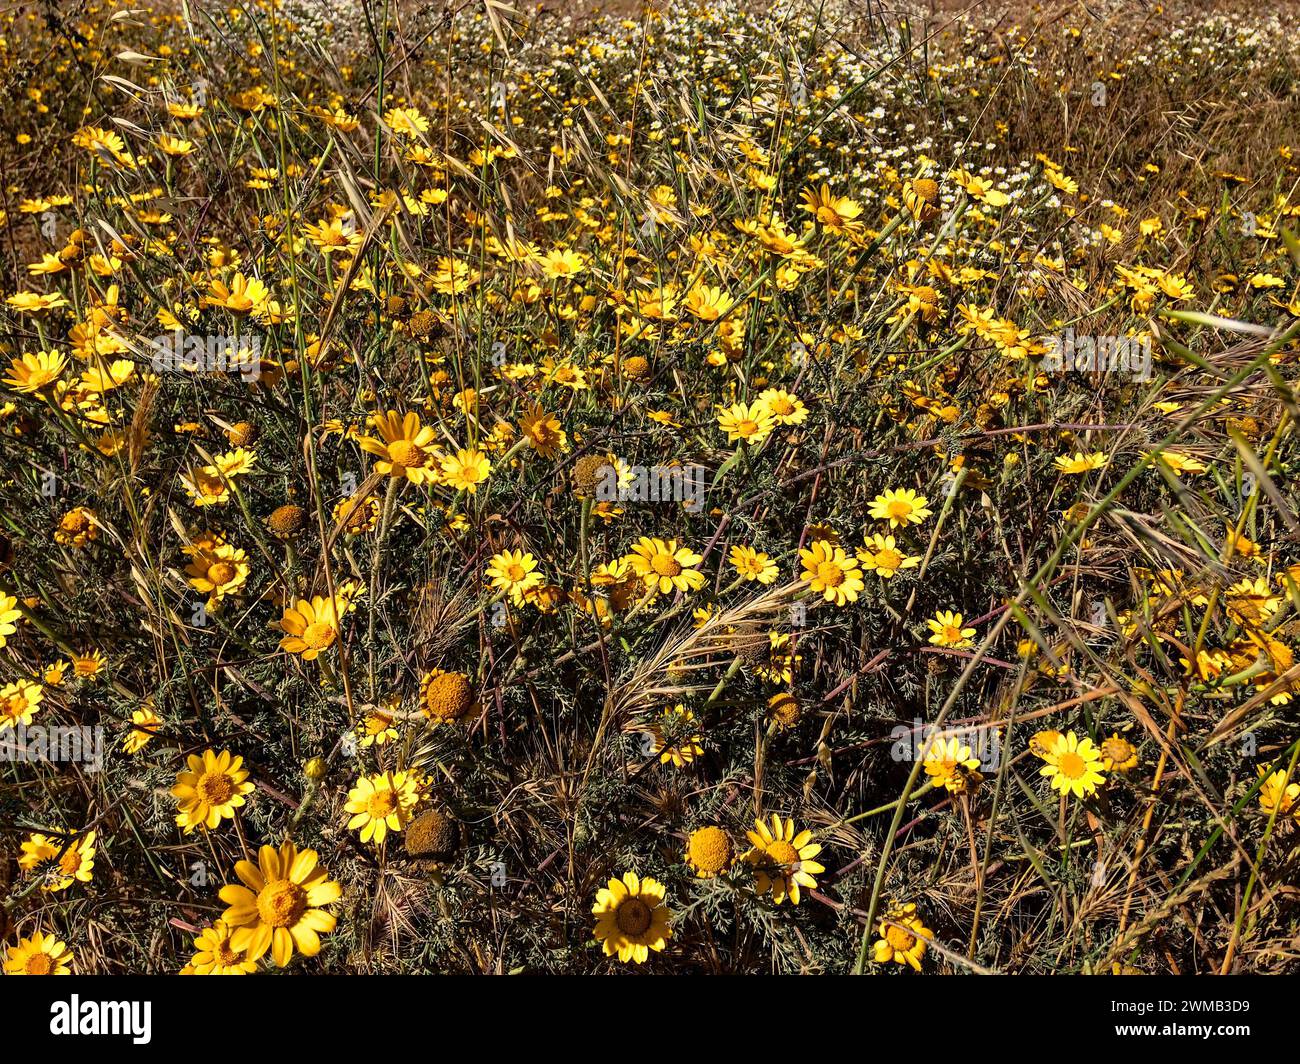 The image captures a dense field of vibrant yellow flowers blooming under bright sunlight. Stock Photo